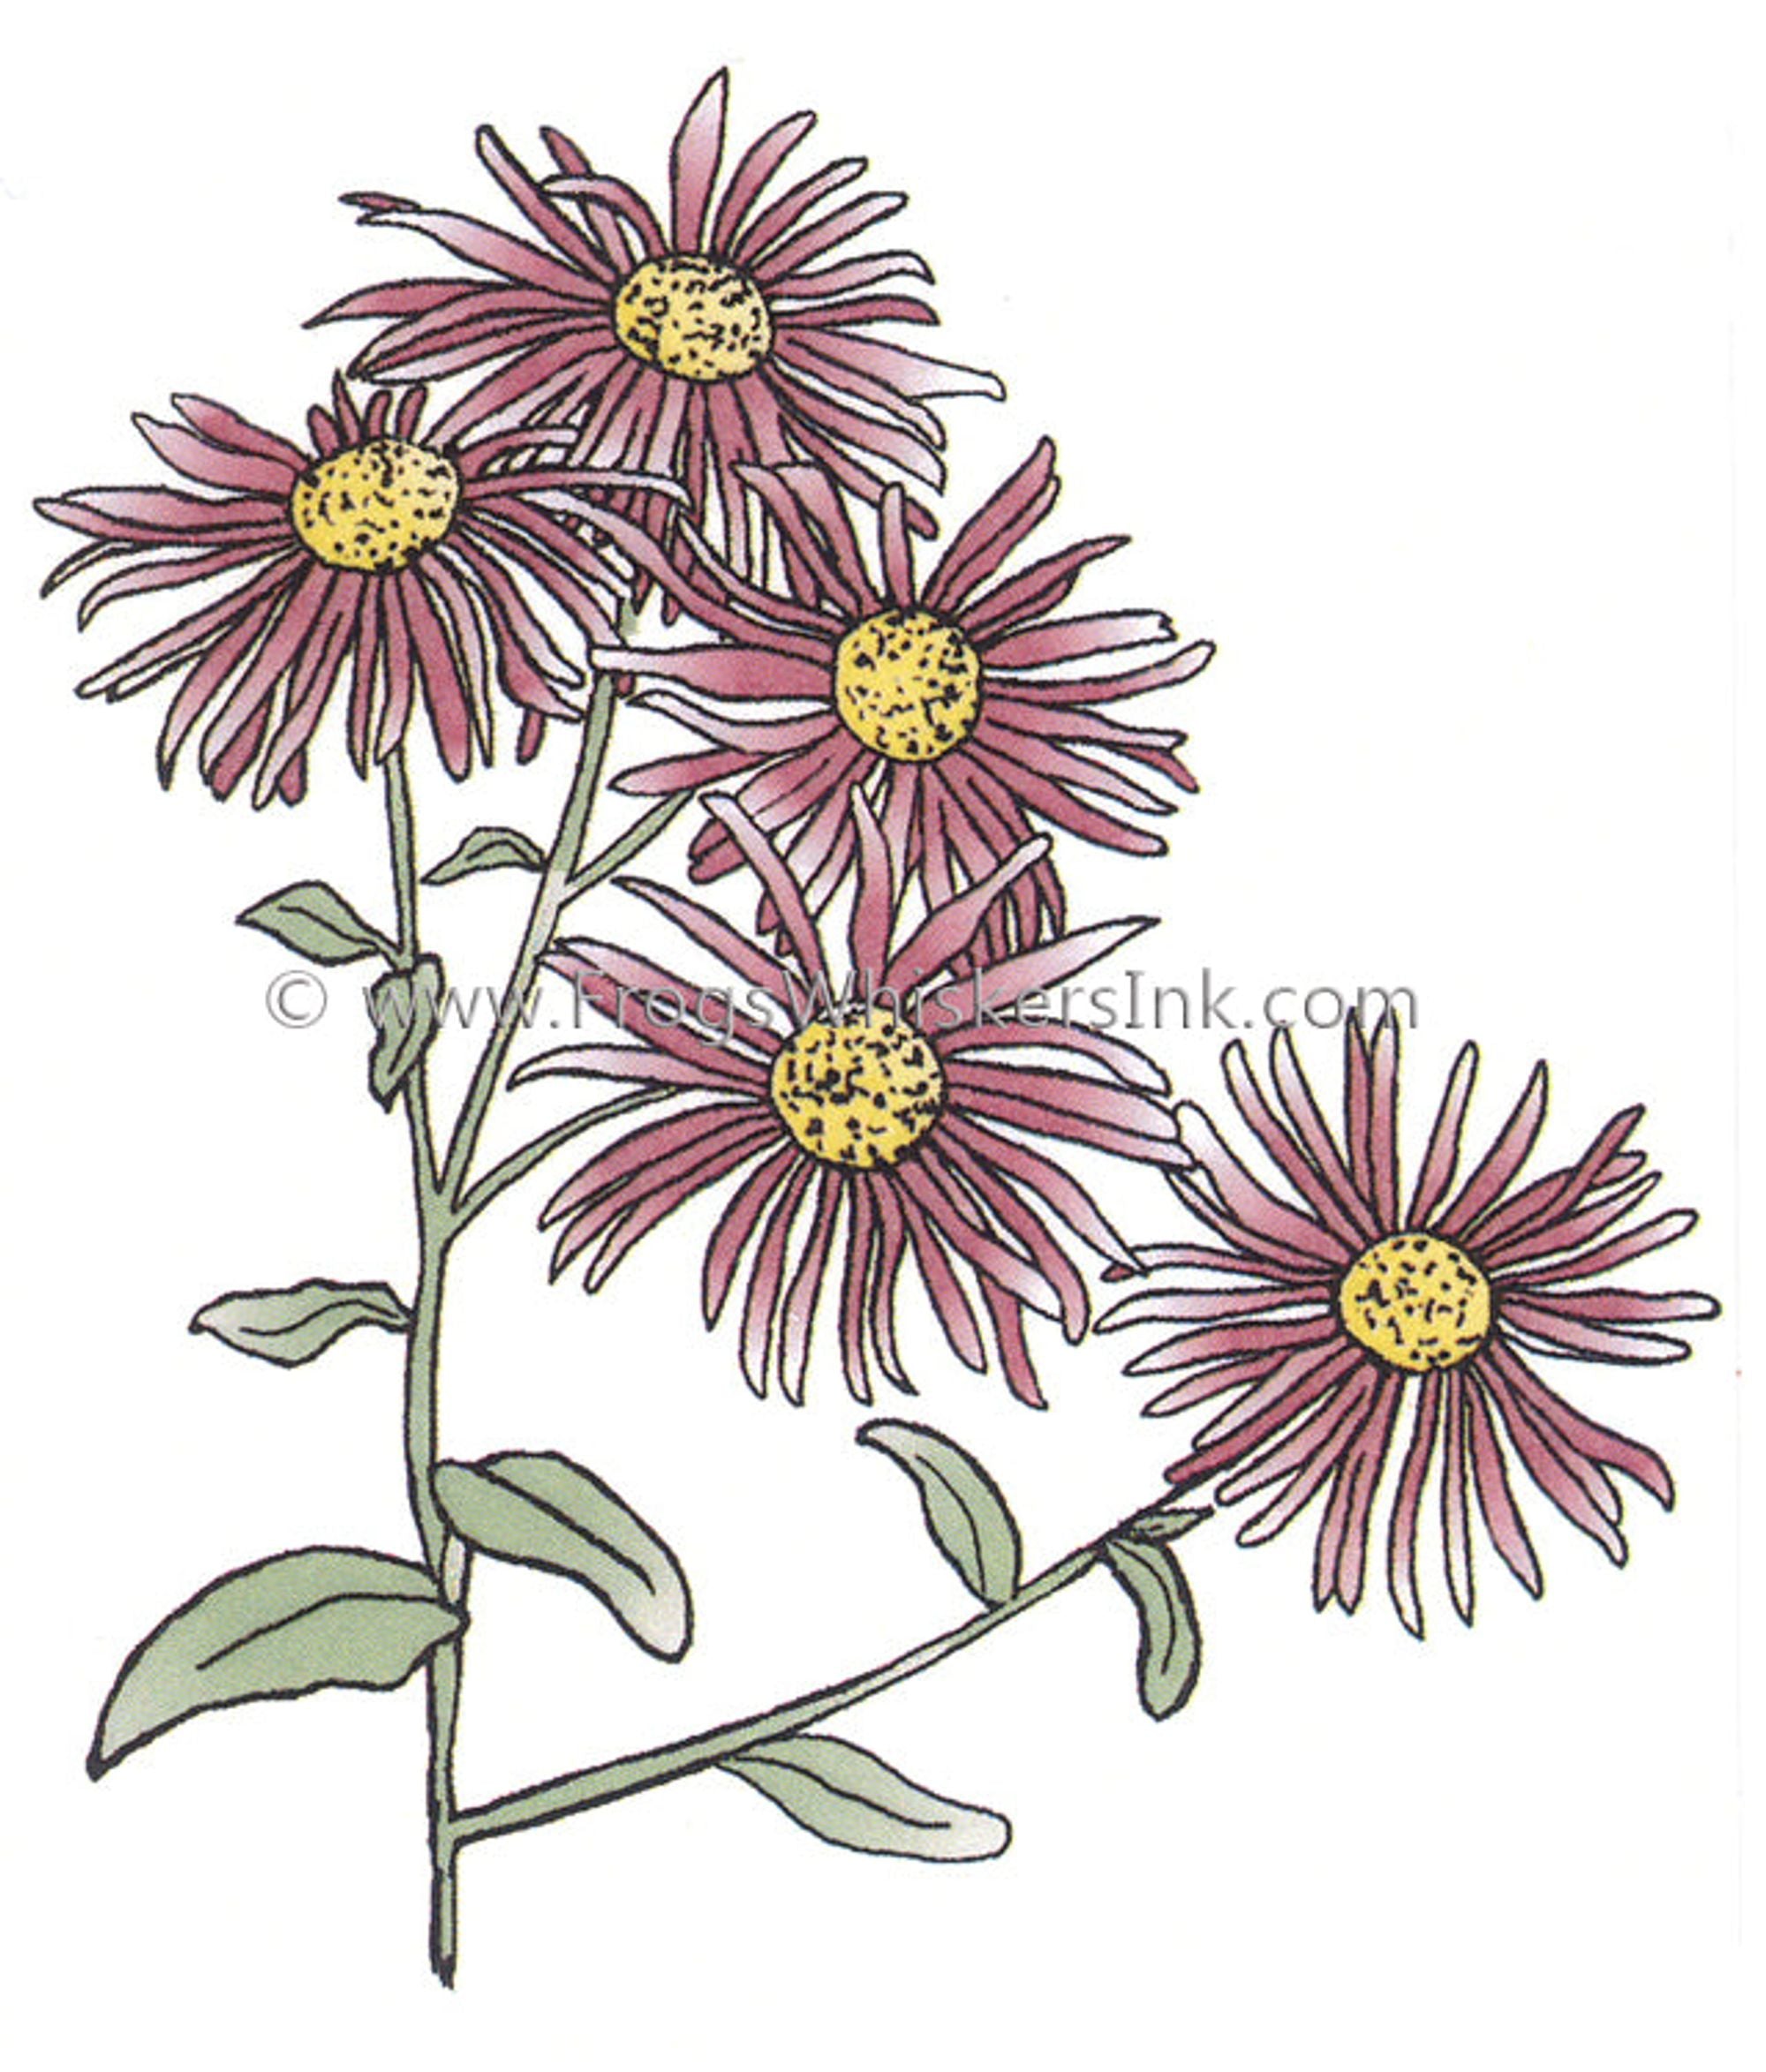 Frog's Whiskers Ink Stamp - Asters Open